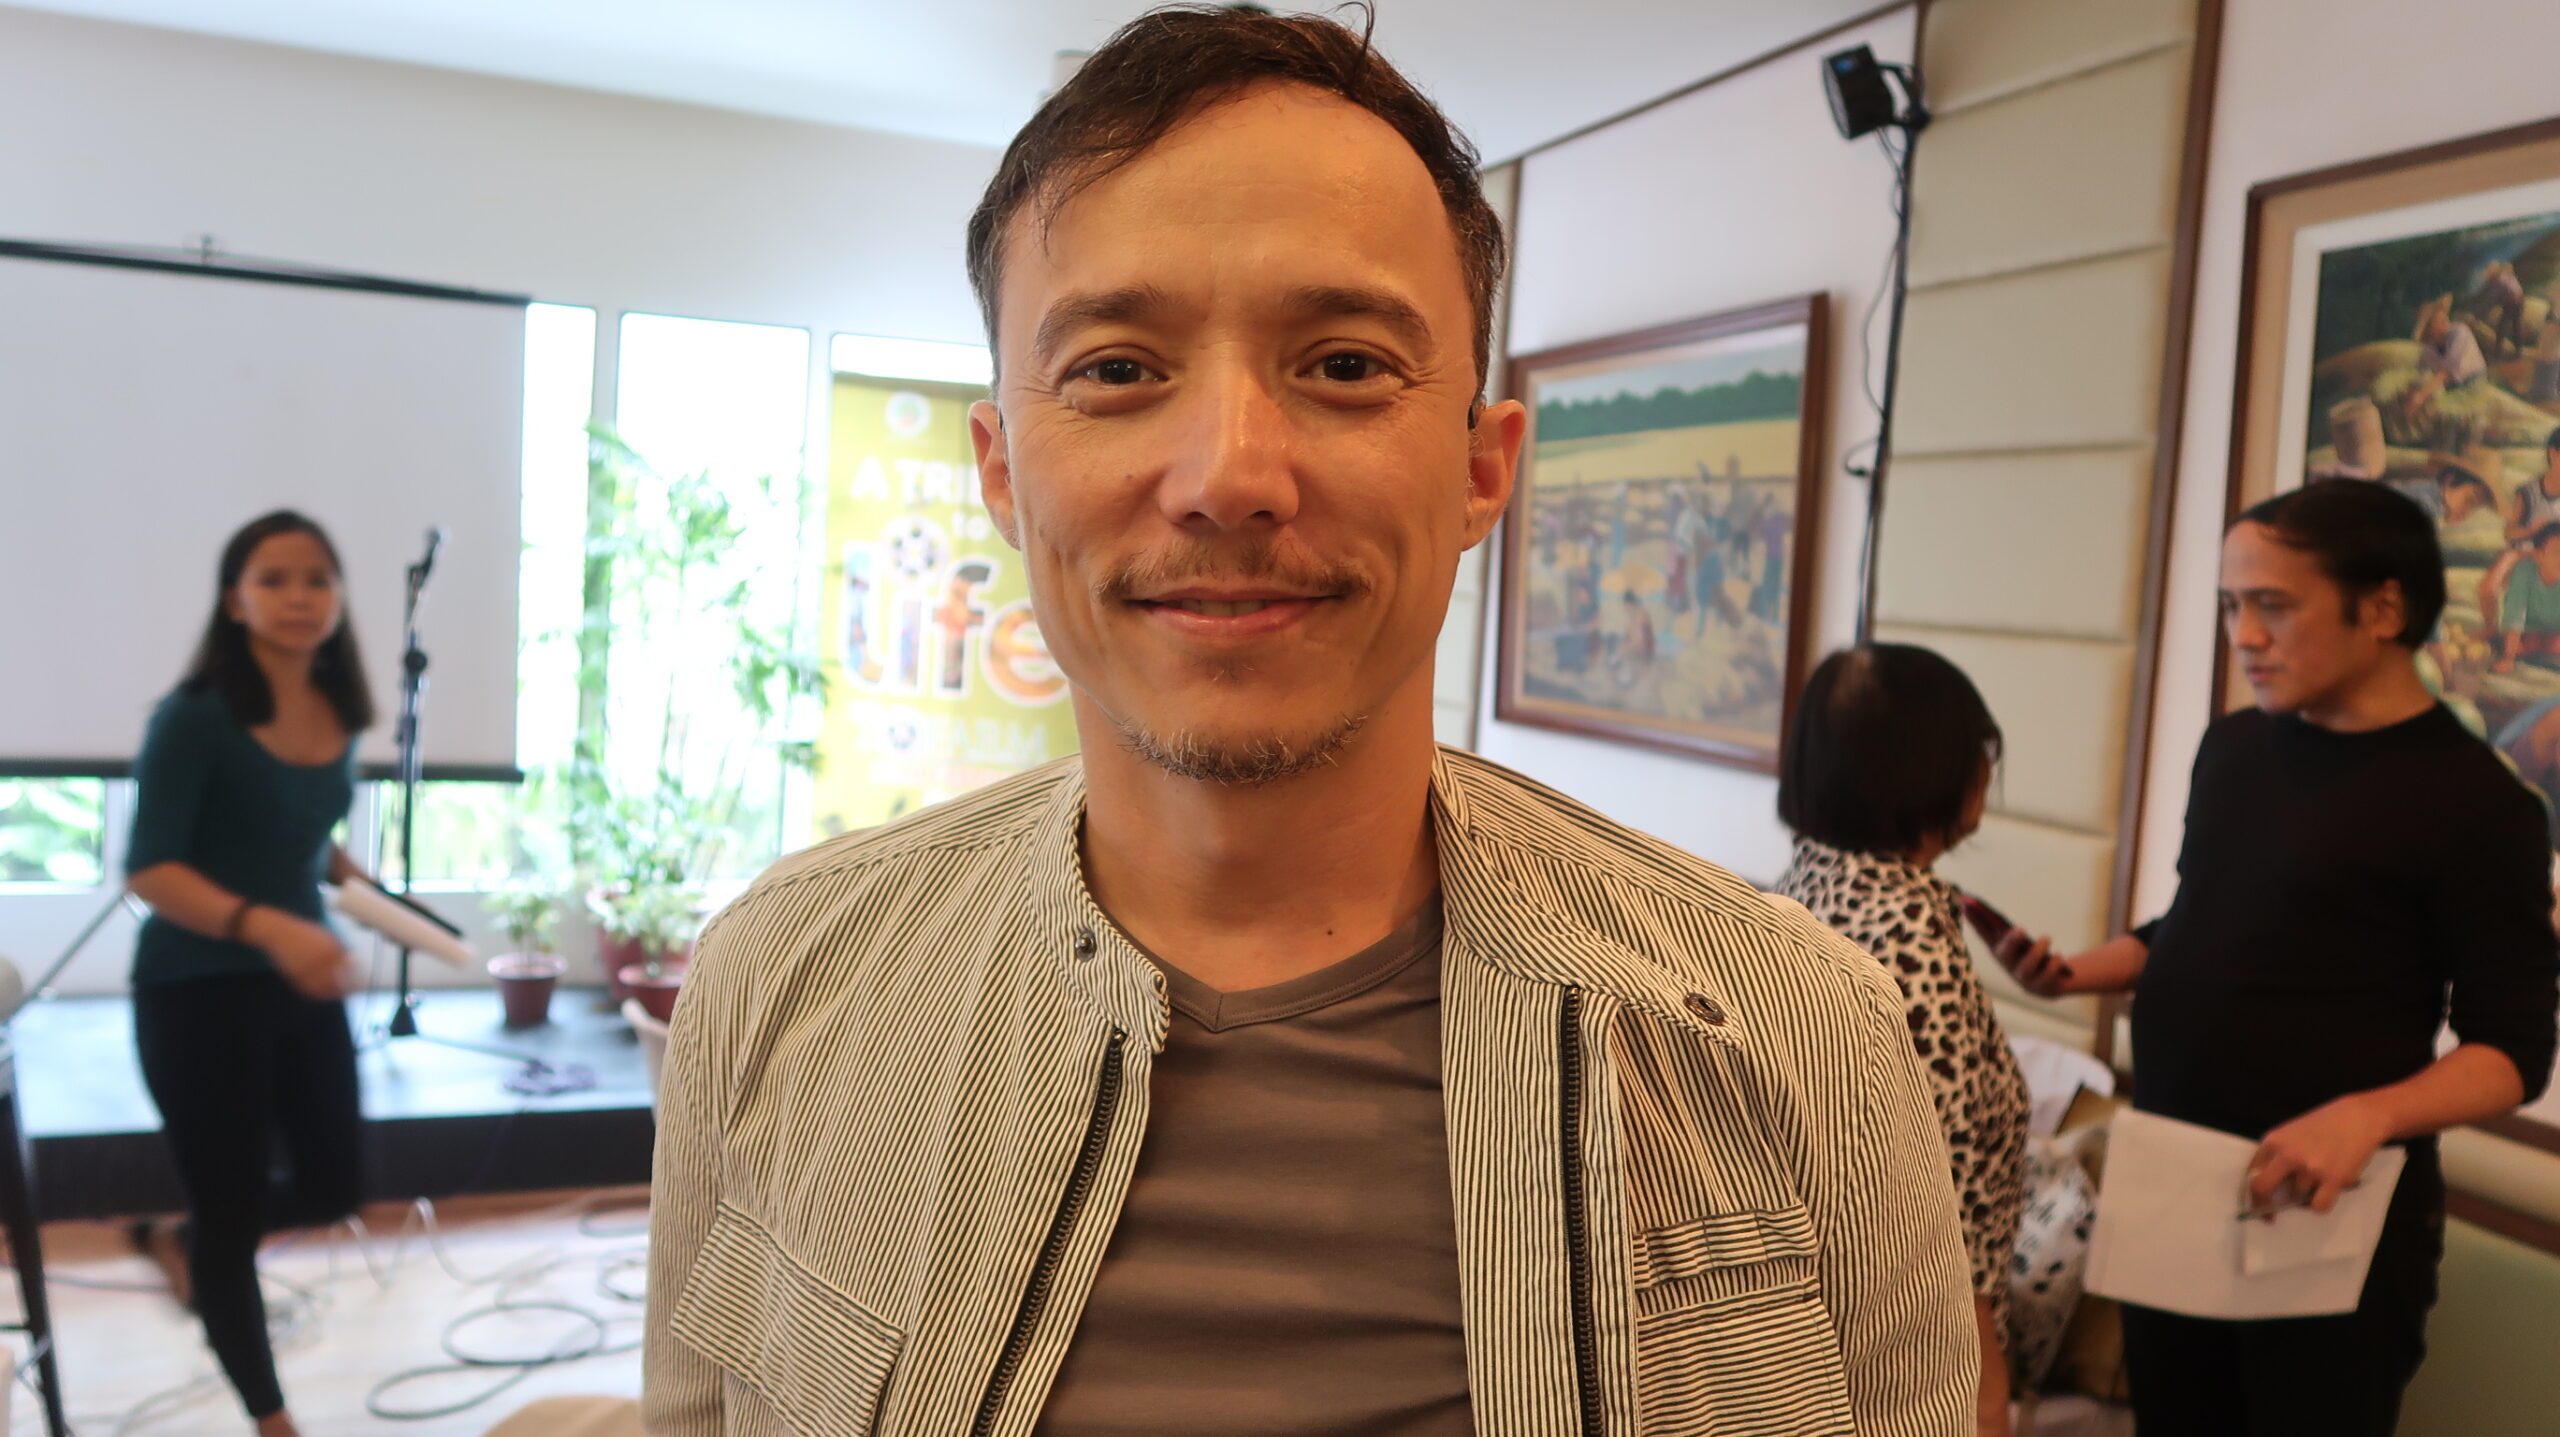 Dolphy as National Artist? Son Epy Quizon: ‘We don’t need a trophy’